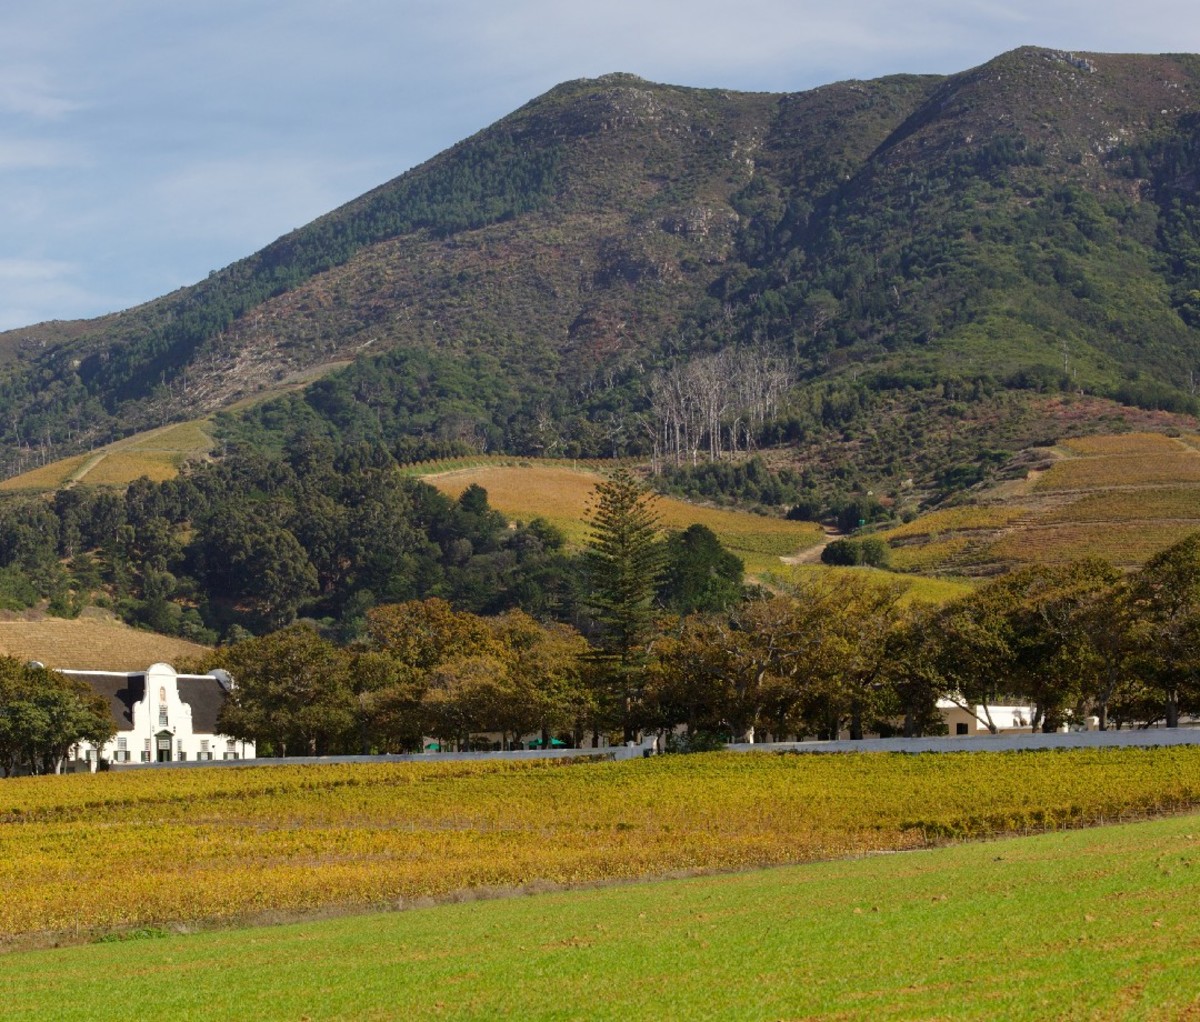 Groot Constantia property, one of South Africa's foremost historical monuments.